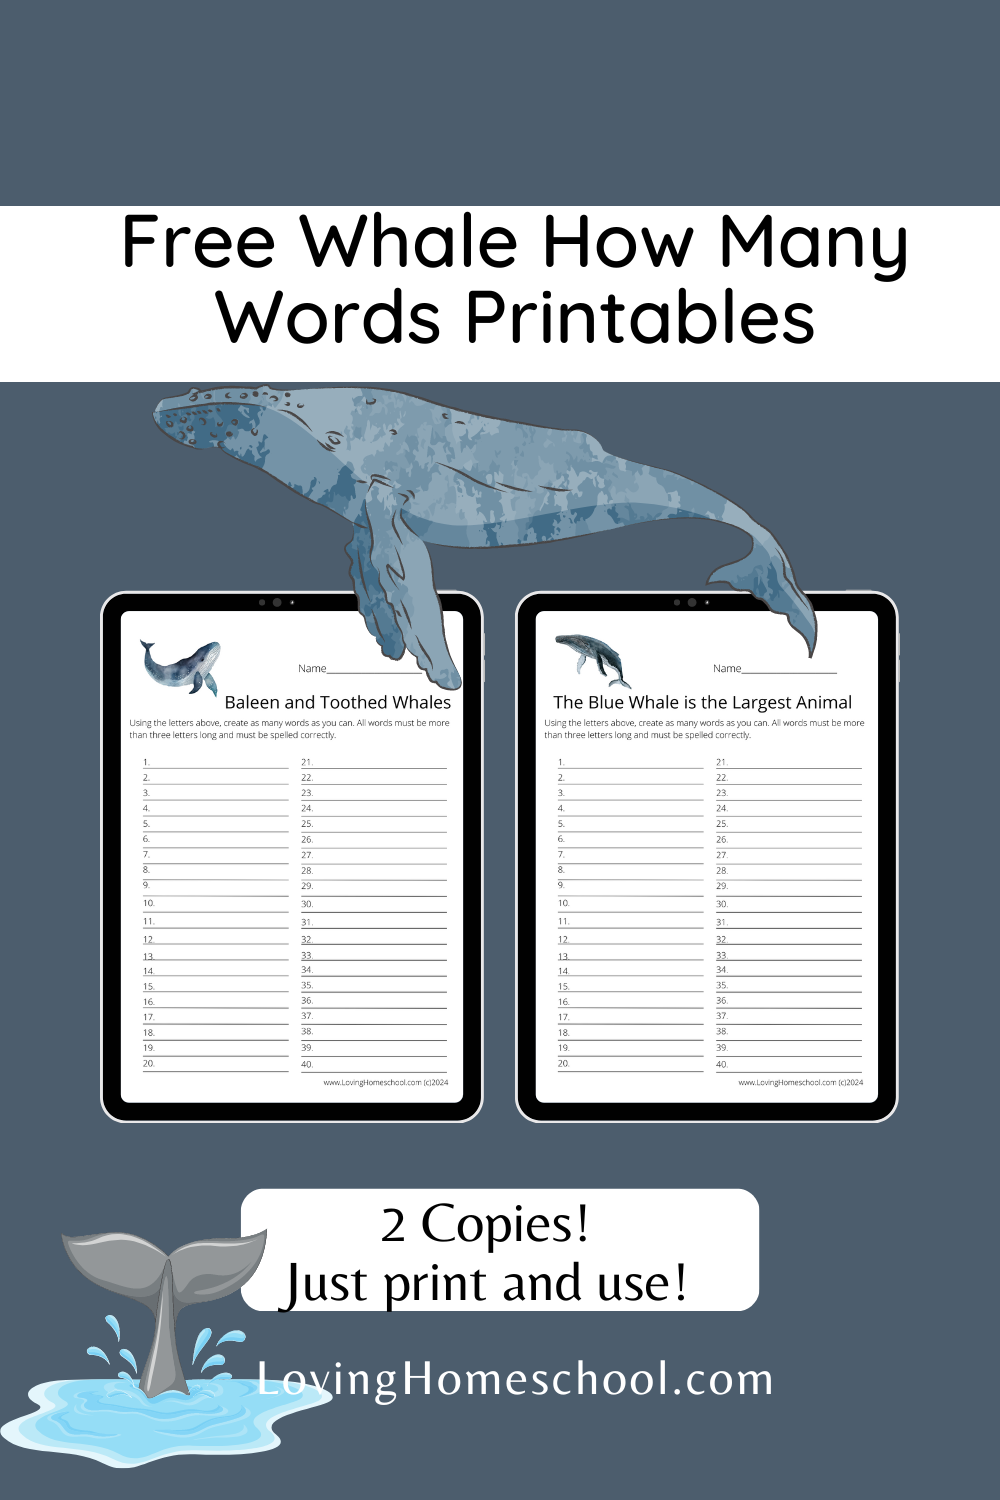 Free Whale How Many Words Printables Pinterest Pin